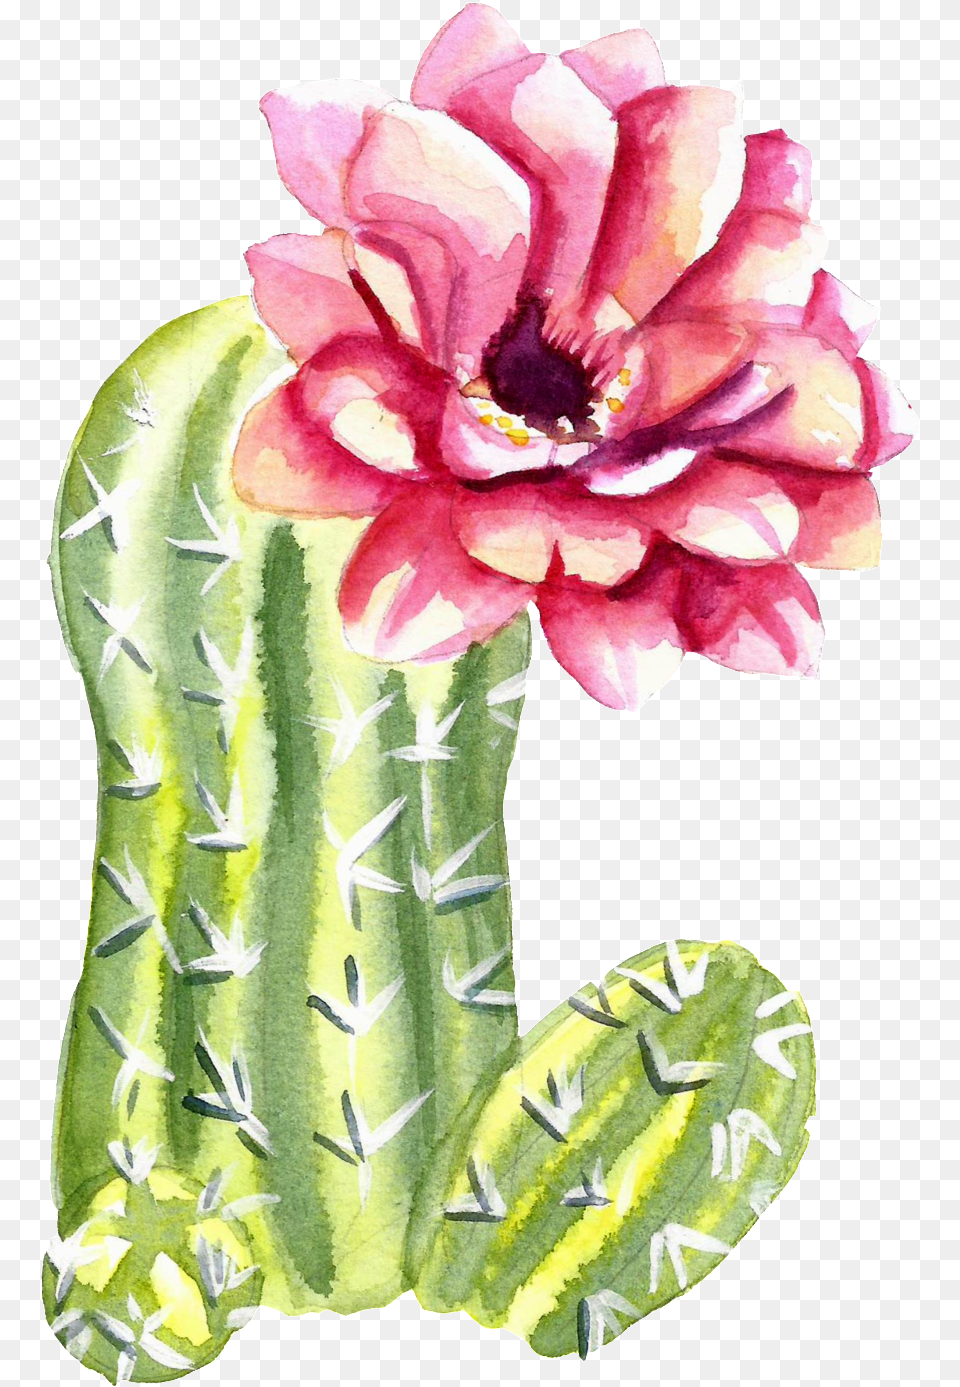 Green Watercolor Hand Painted Cactus Flower Transparent Flower Cactus Watercolor, Plant, Rose Free Png